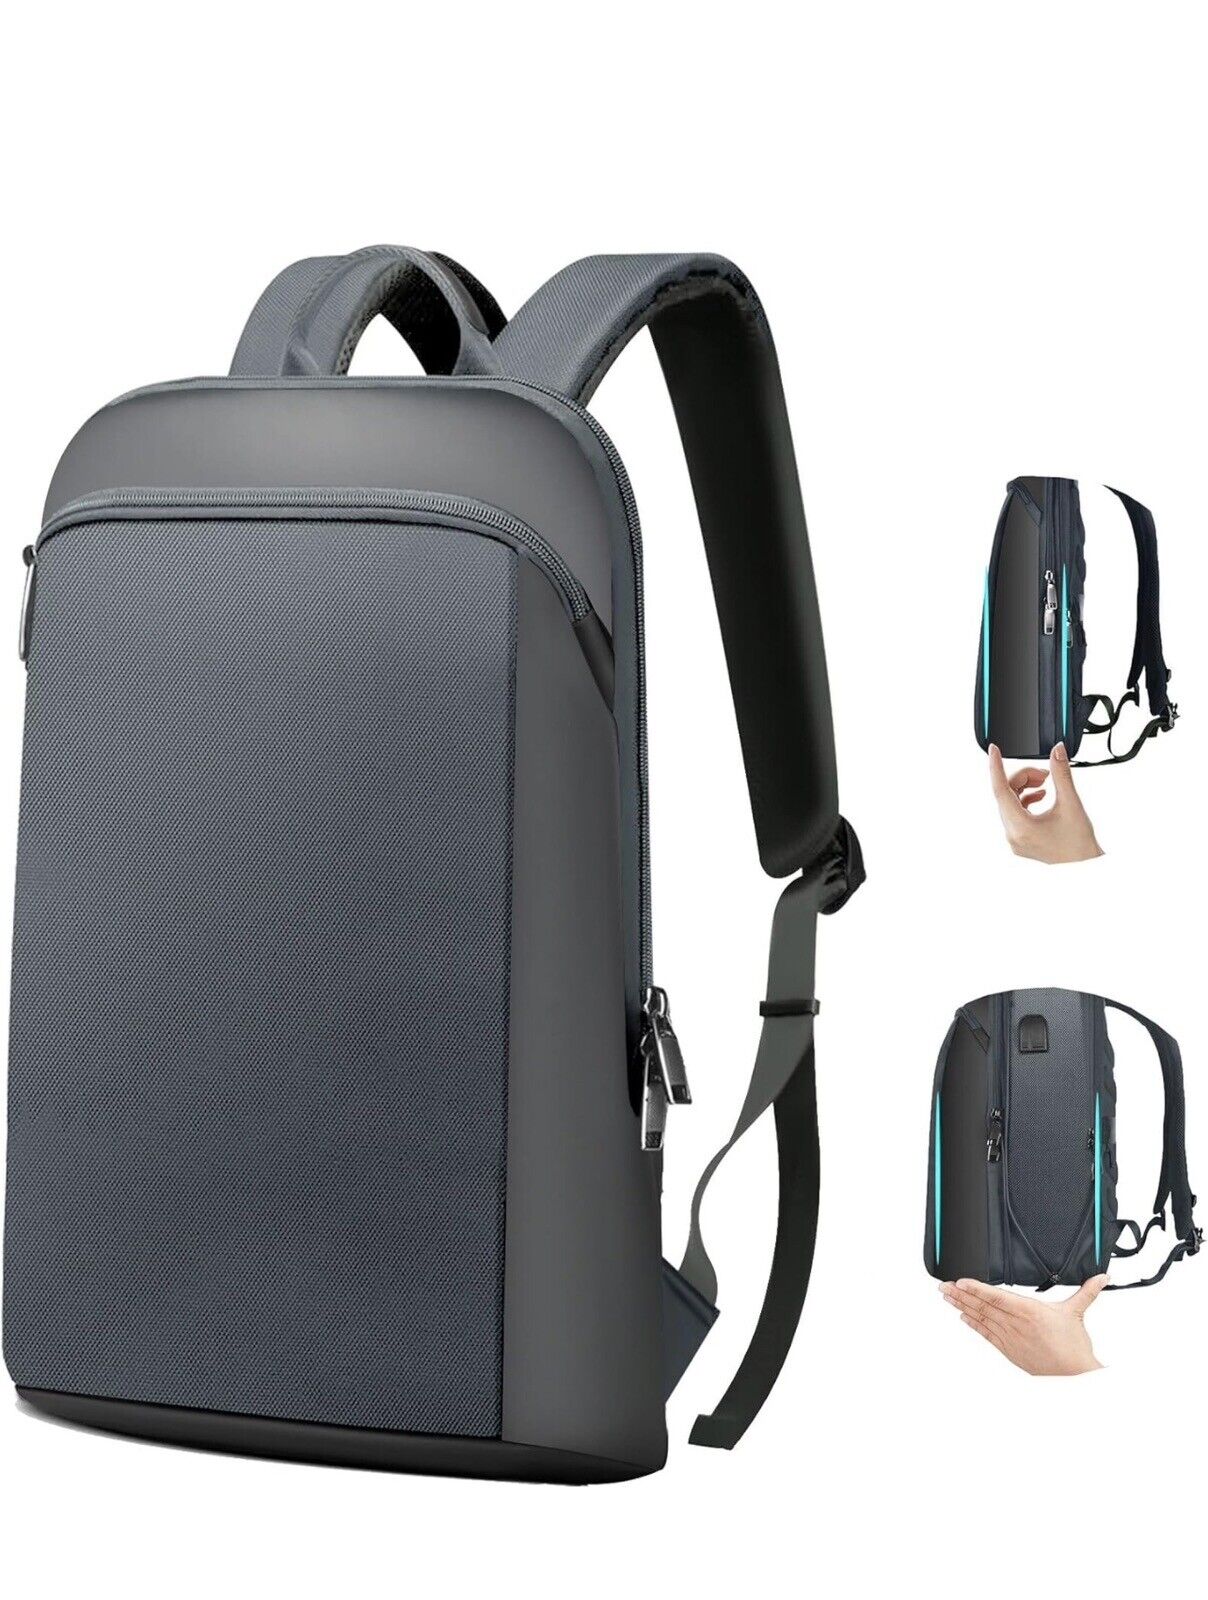 ZINZ Slim and Expandable 15 15.6 16 Inch Laptop Backpack